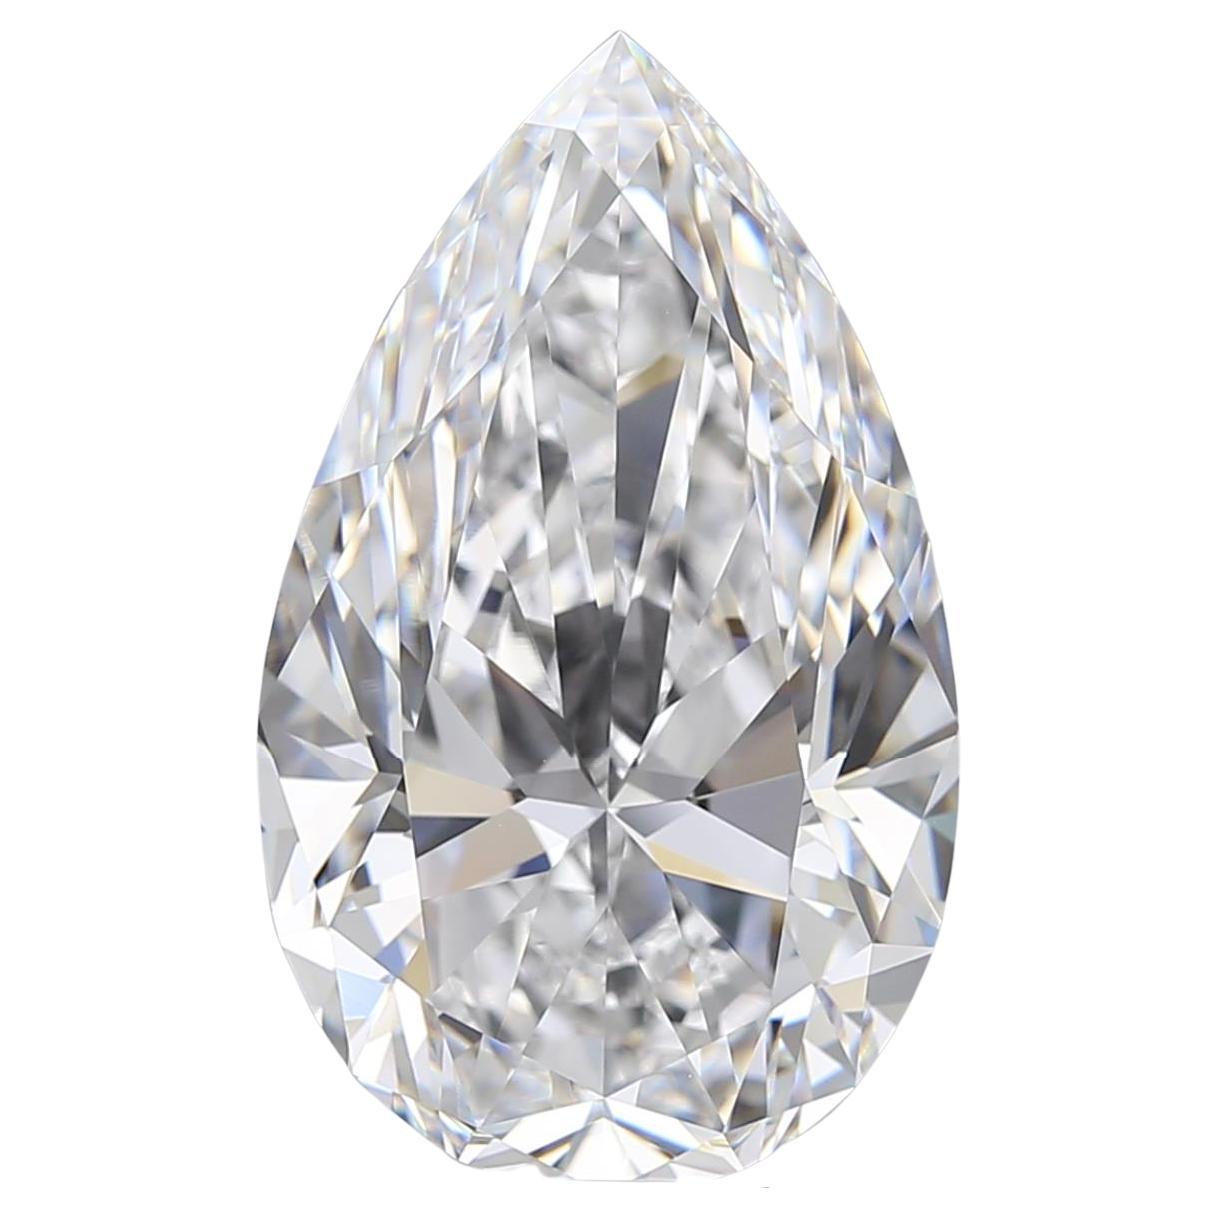 Exceptional Flawless Type 2A GIA Certified 5.41 Carat Pear Cut Diamond Ring